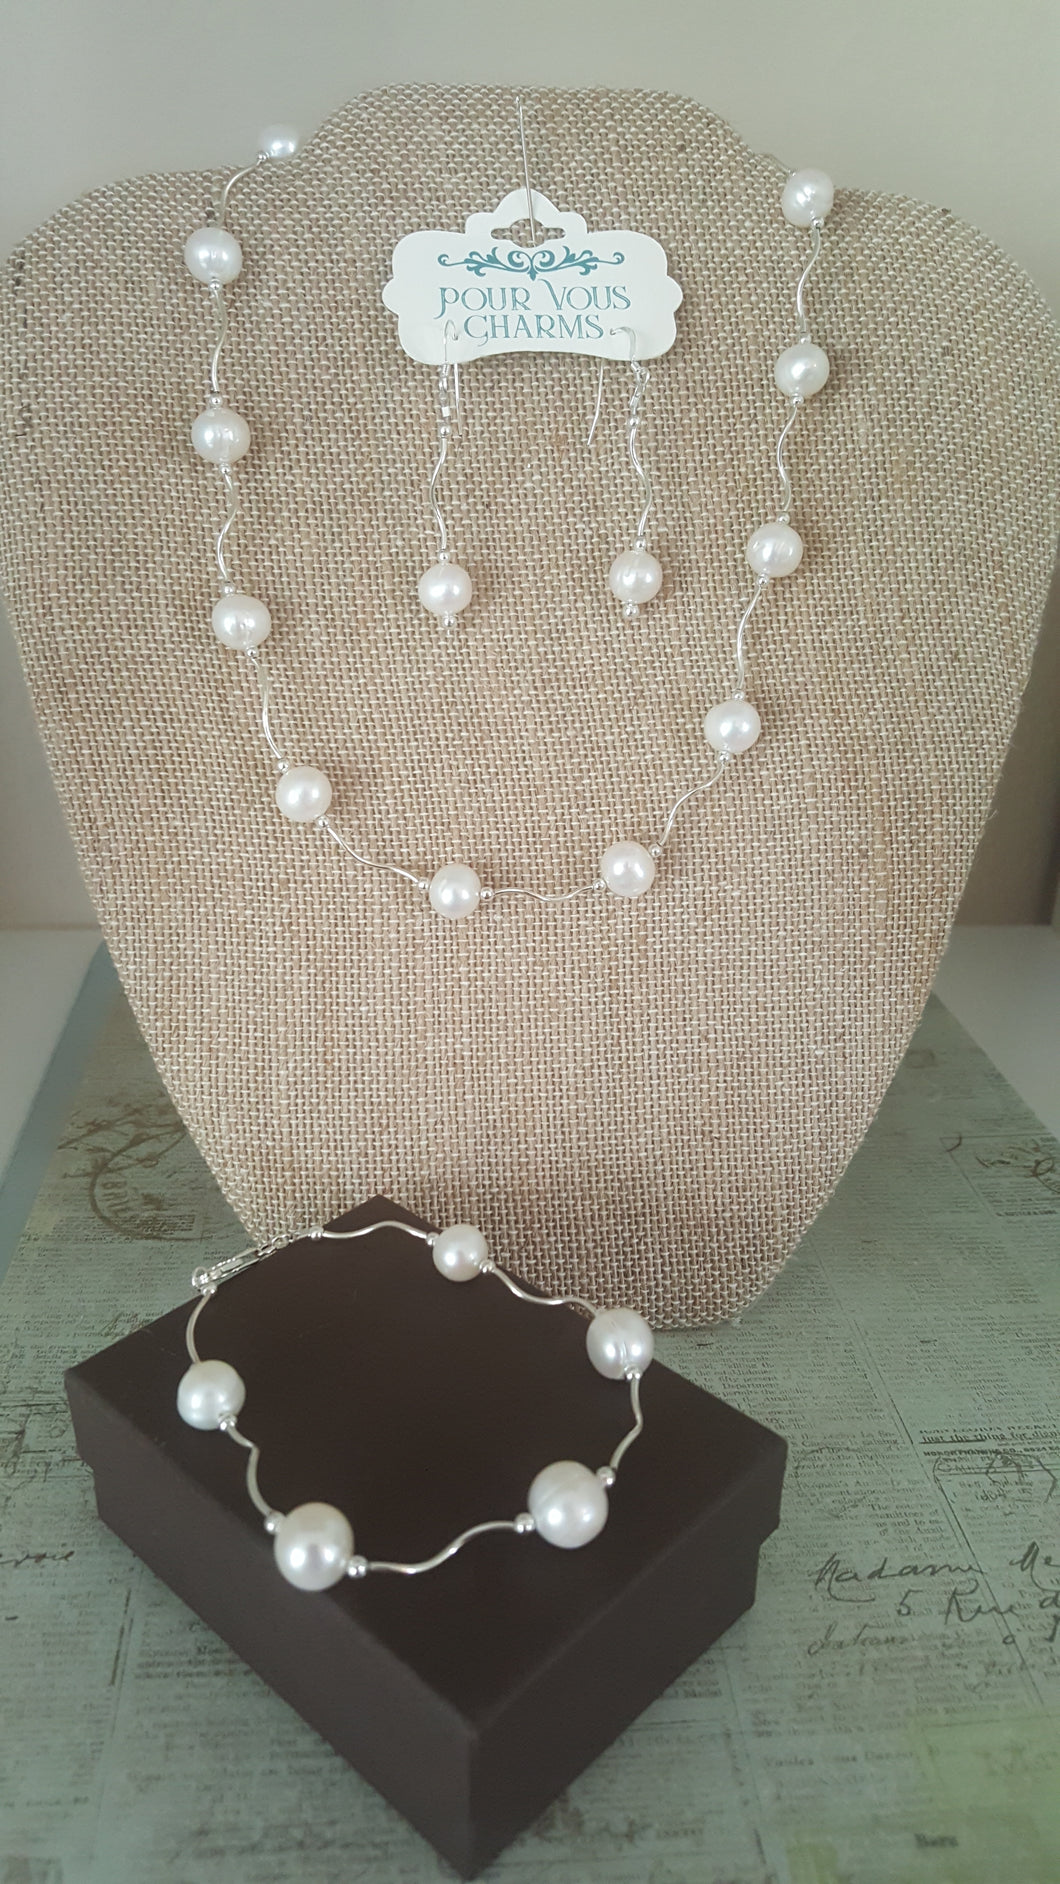 Extension Wave Design Necklace ,Bracelet and Earrings Set with Cultured Freshwater Pearls